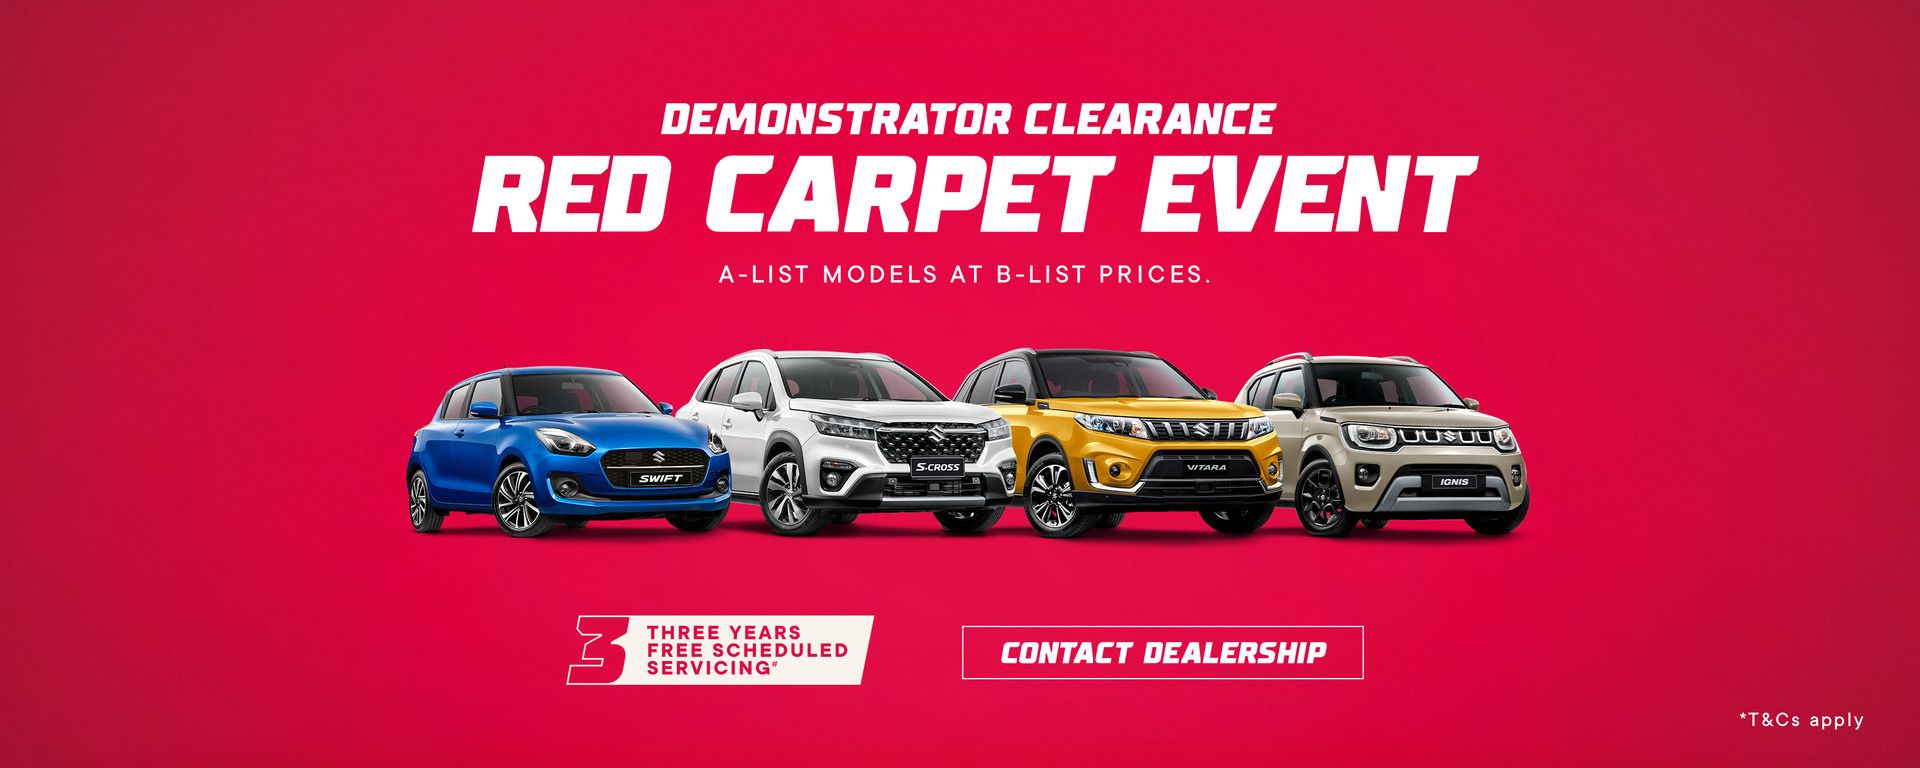 Demonstrator Clearance - Red Carpet Event